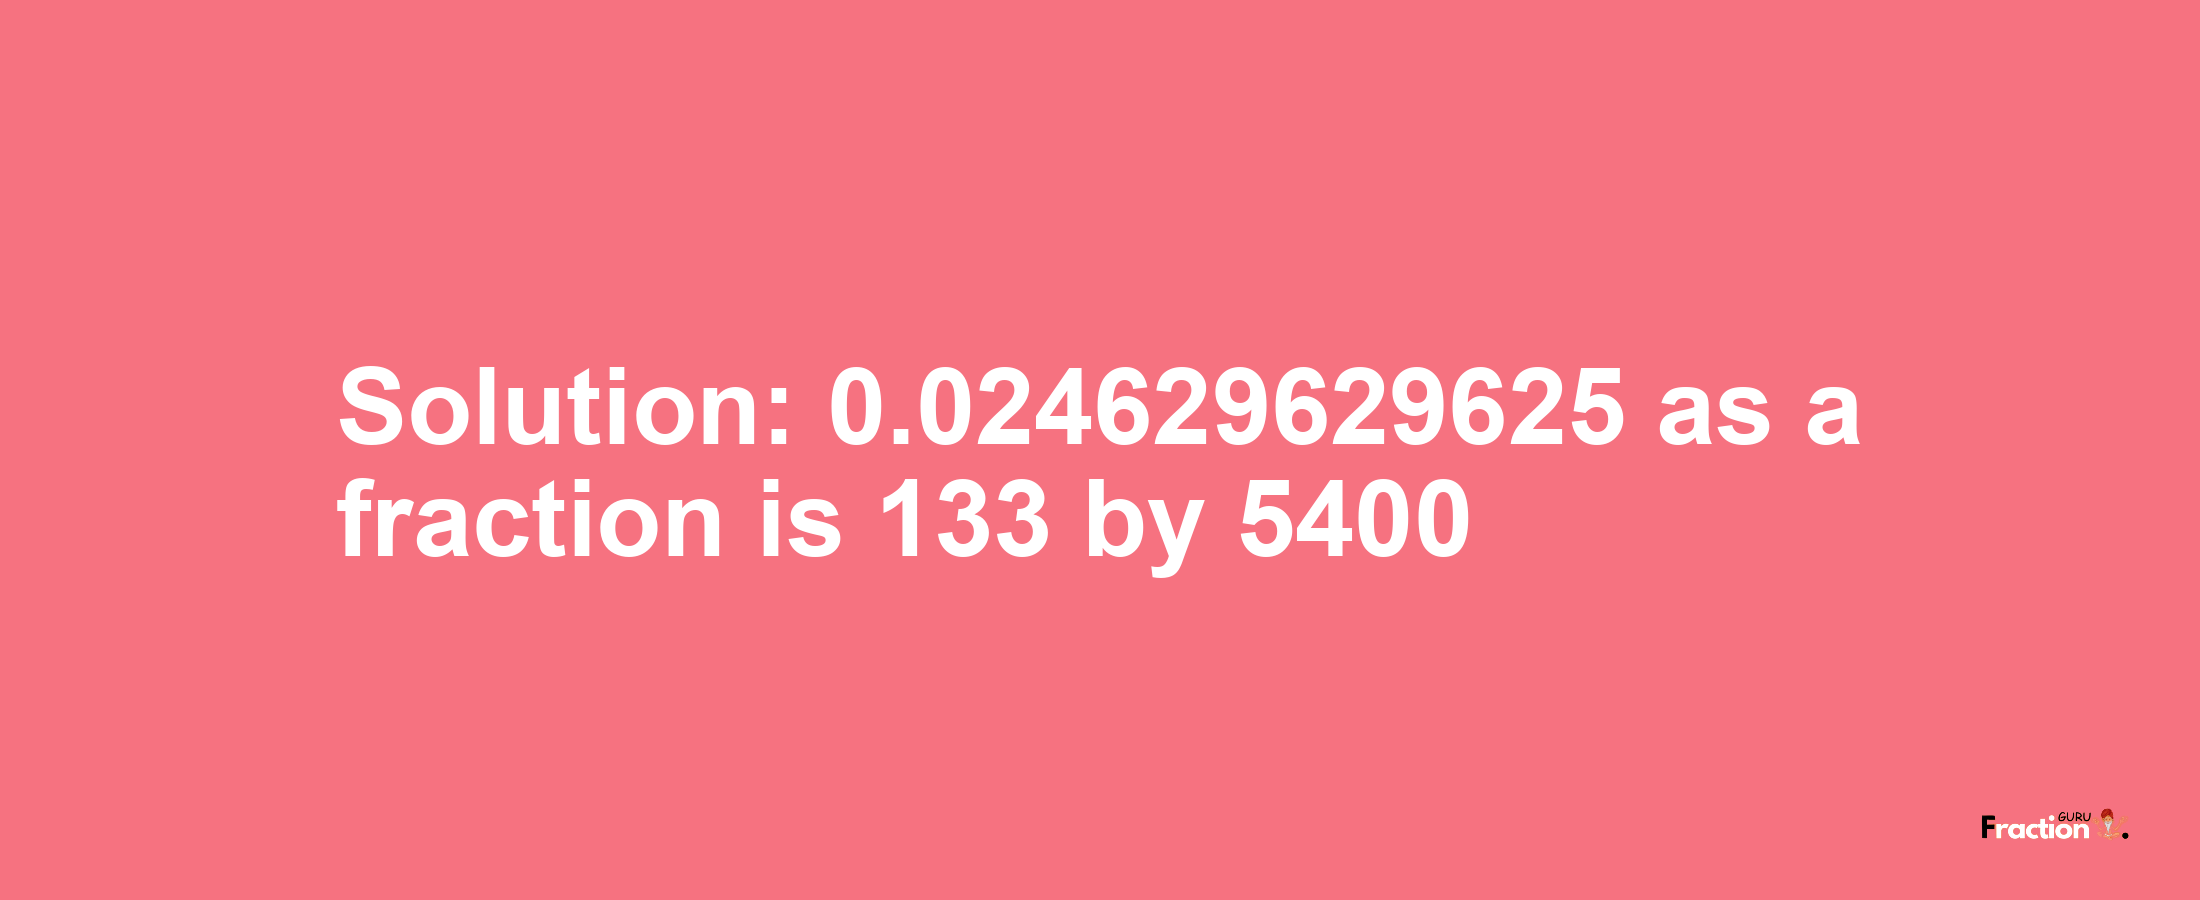 Solution:0.024629629625 as a fraction is 133/5400